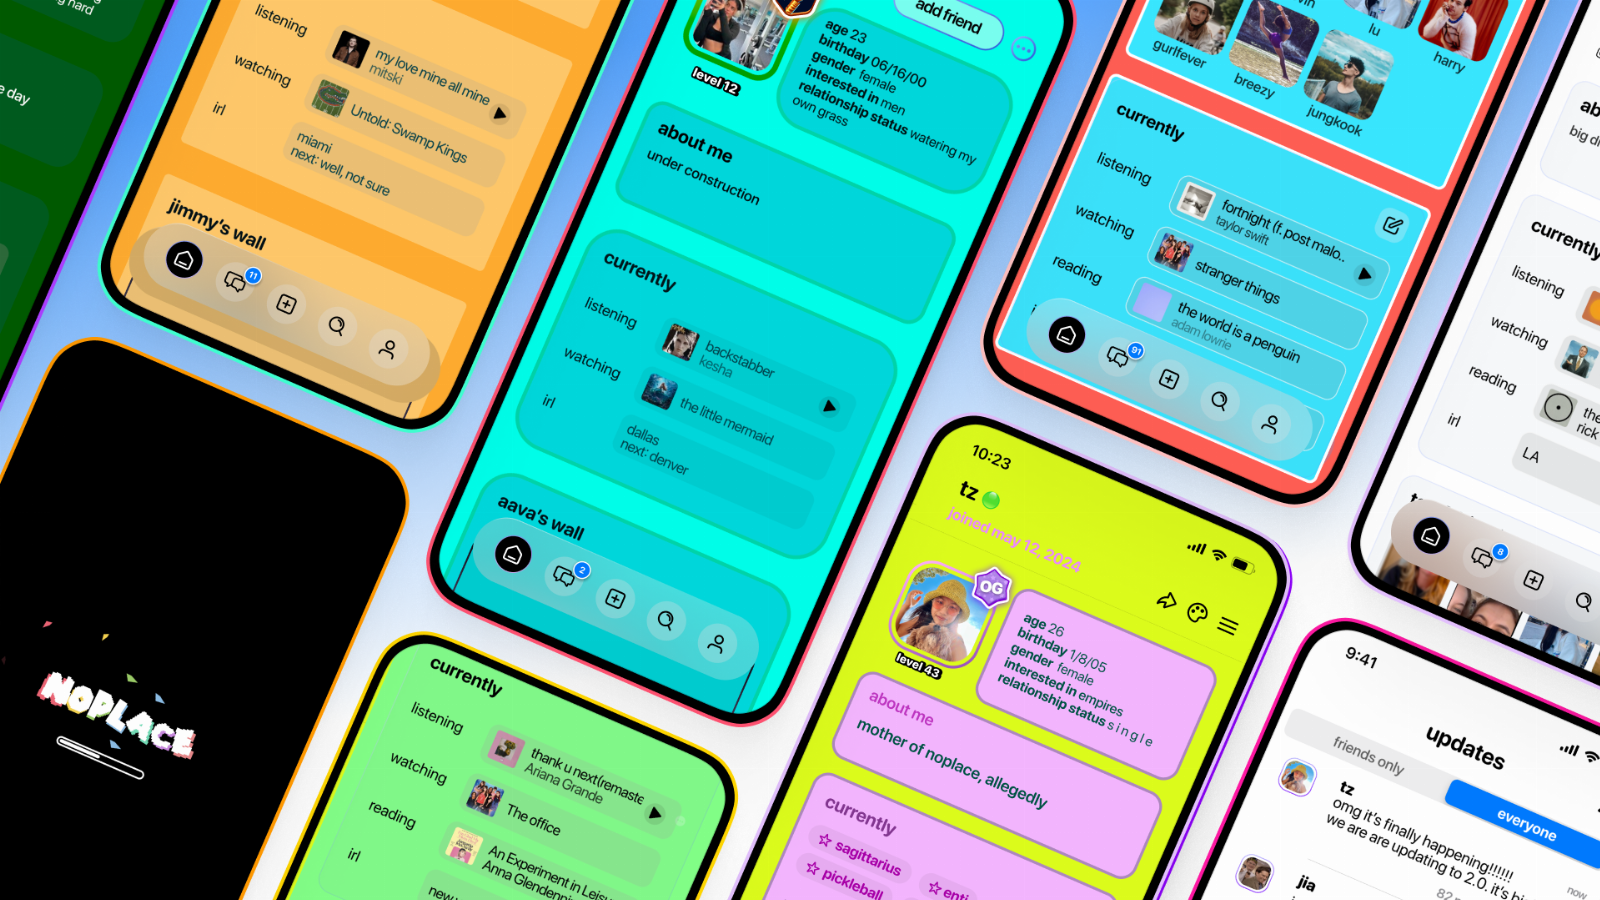 Noplace, a mashup of Twitter and MySpace for Gen Z, hits No. 1 on the App Store